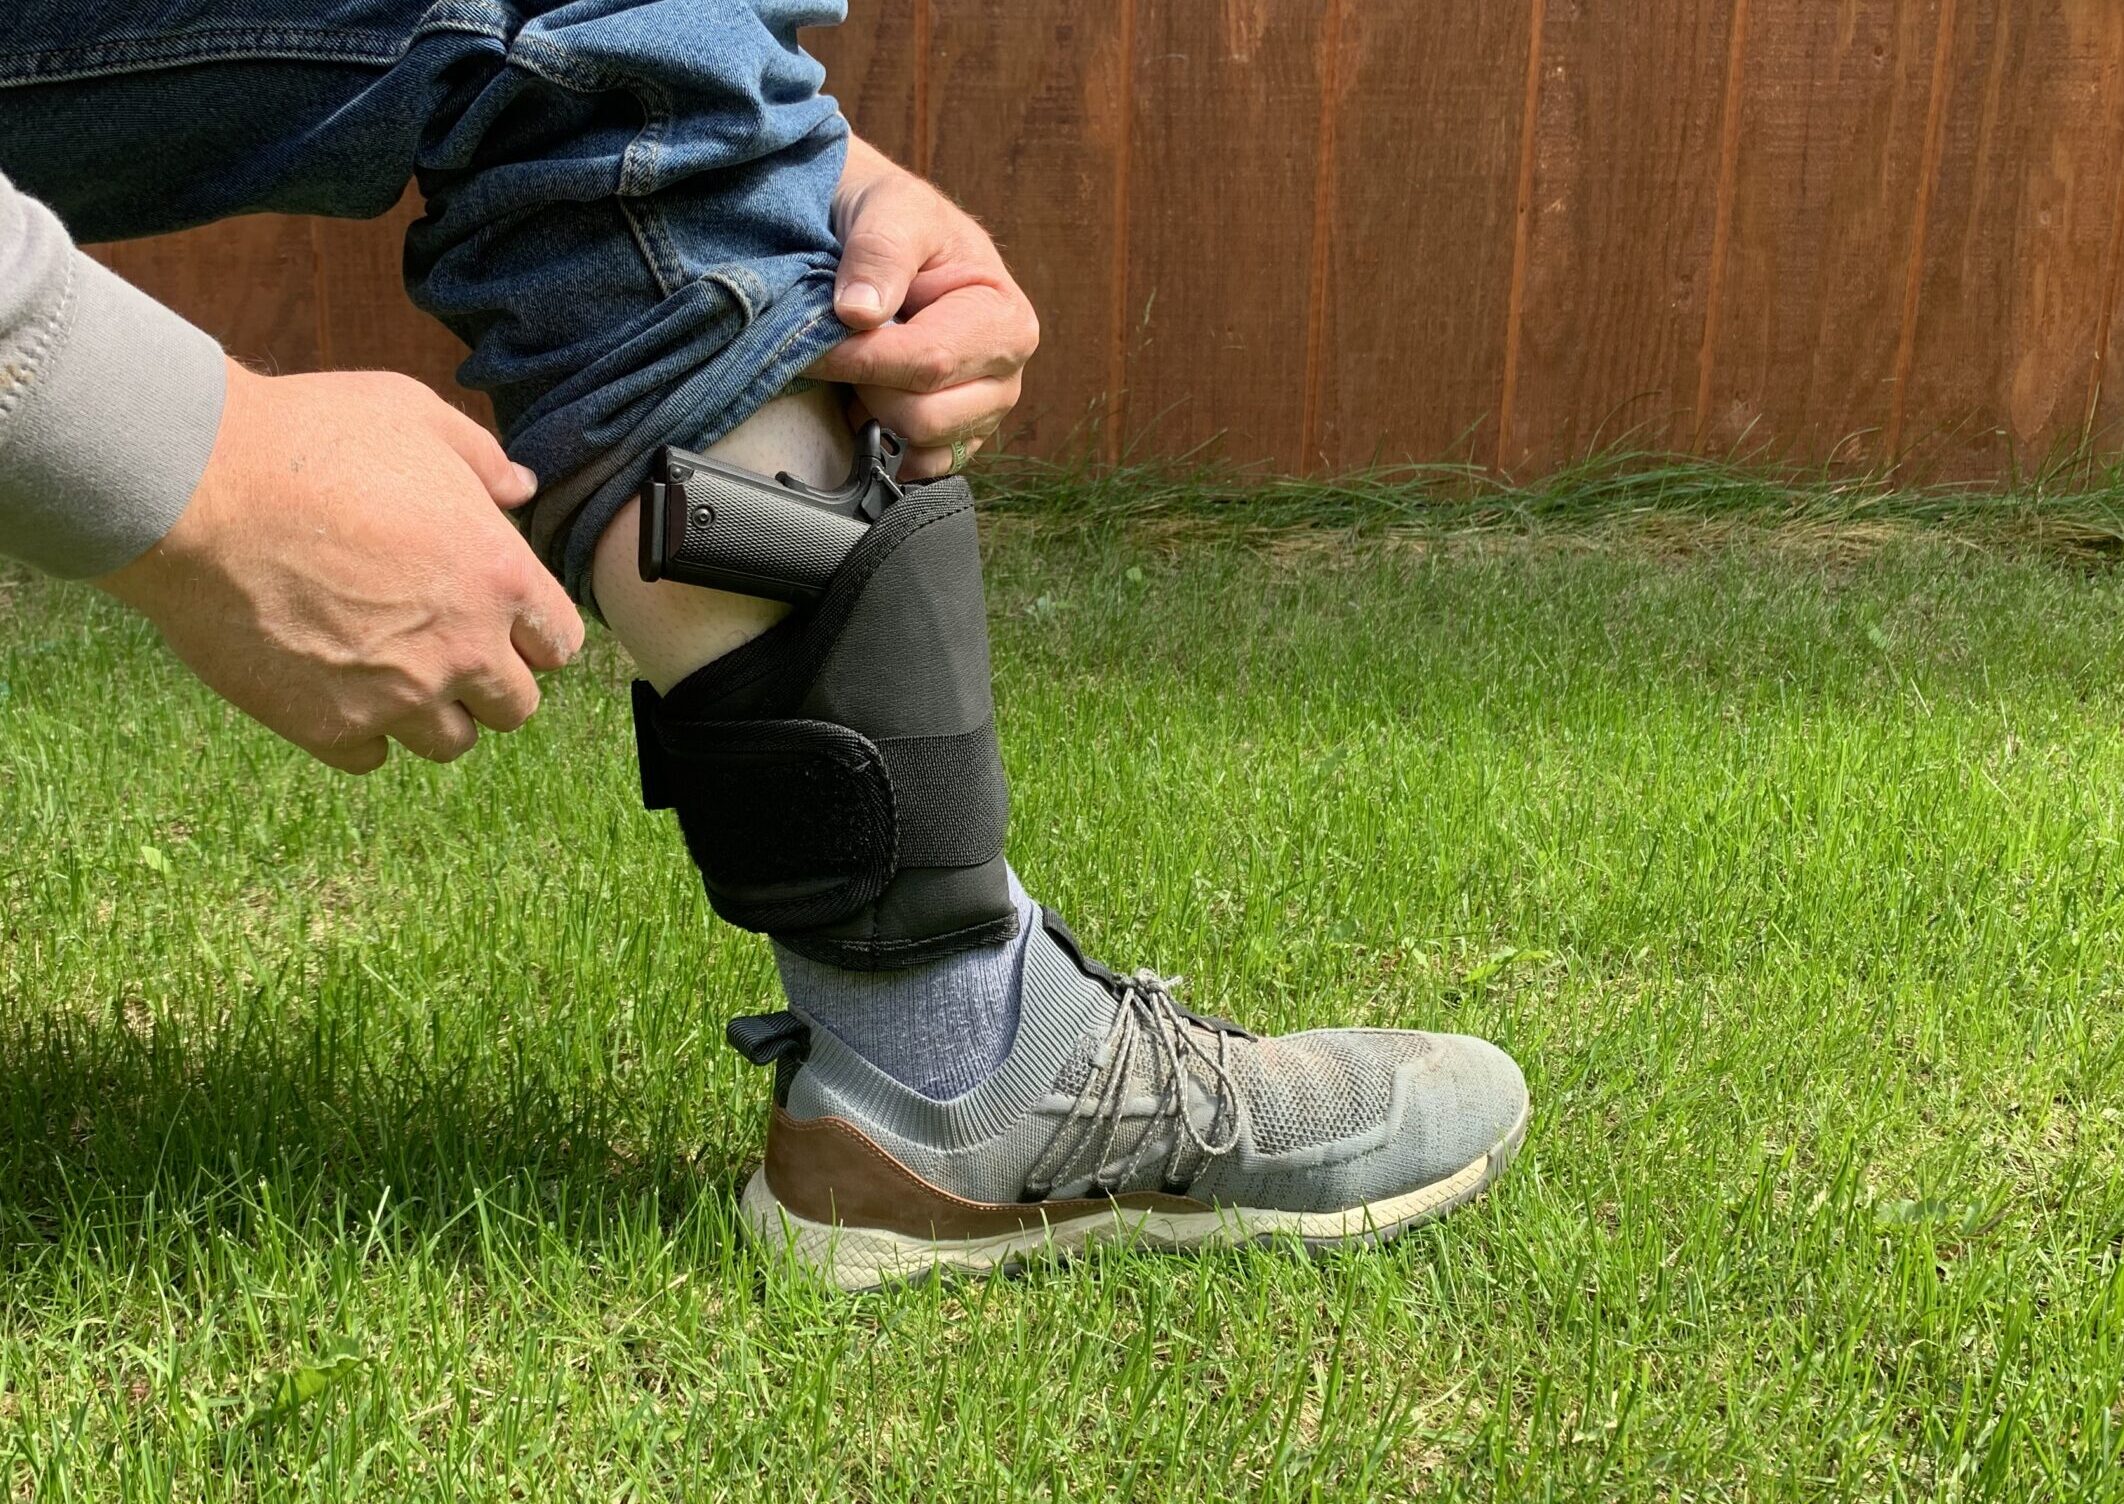 Sticky Holsters ankle biter wrap